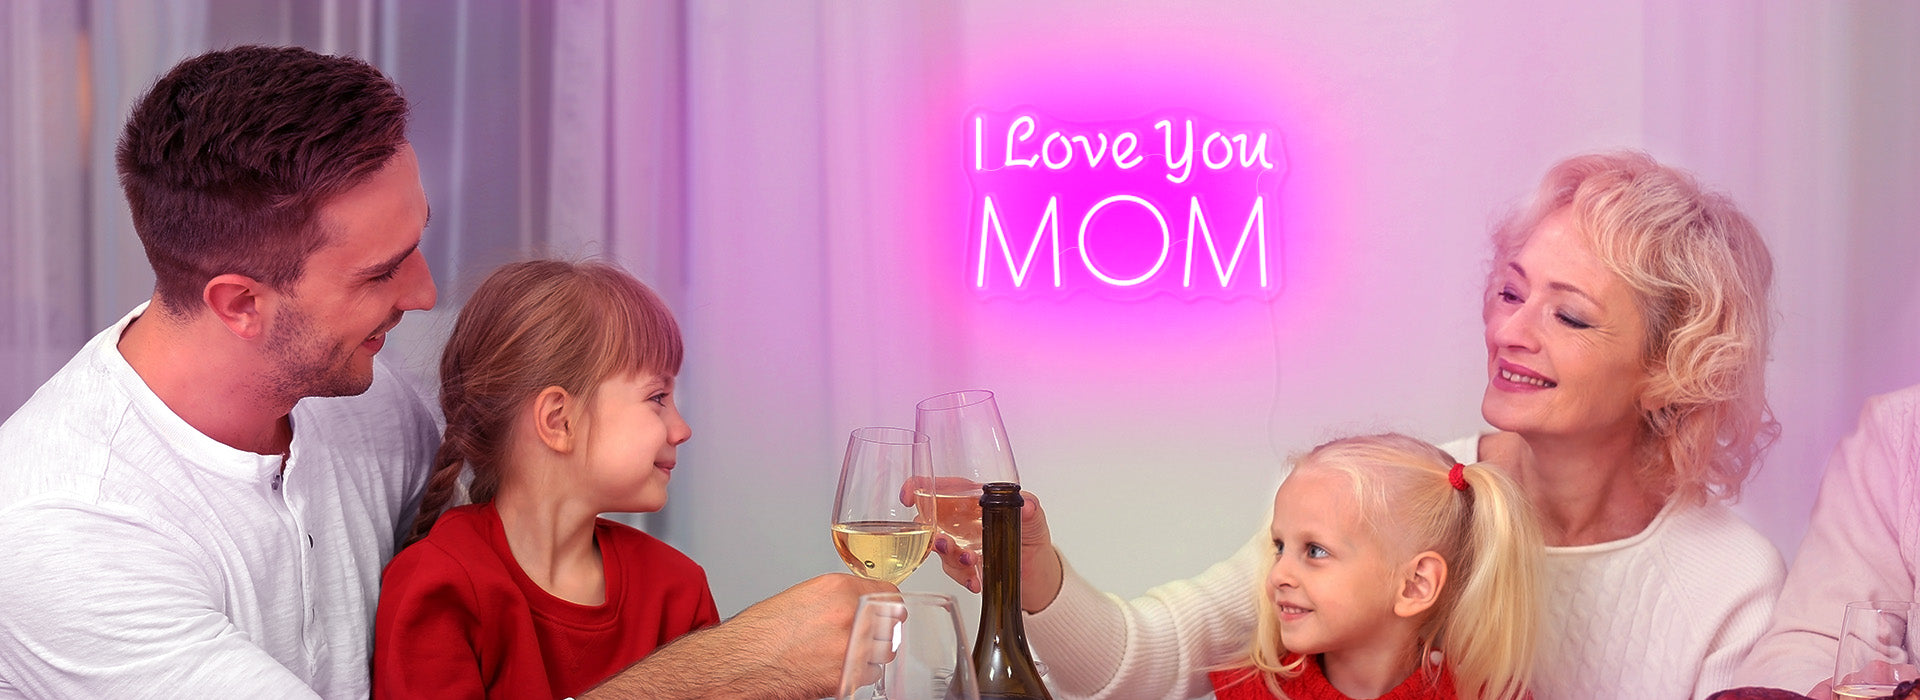 i love you mum neon sign